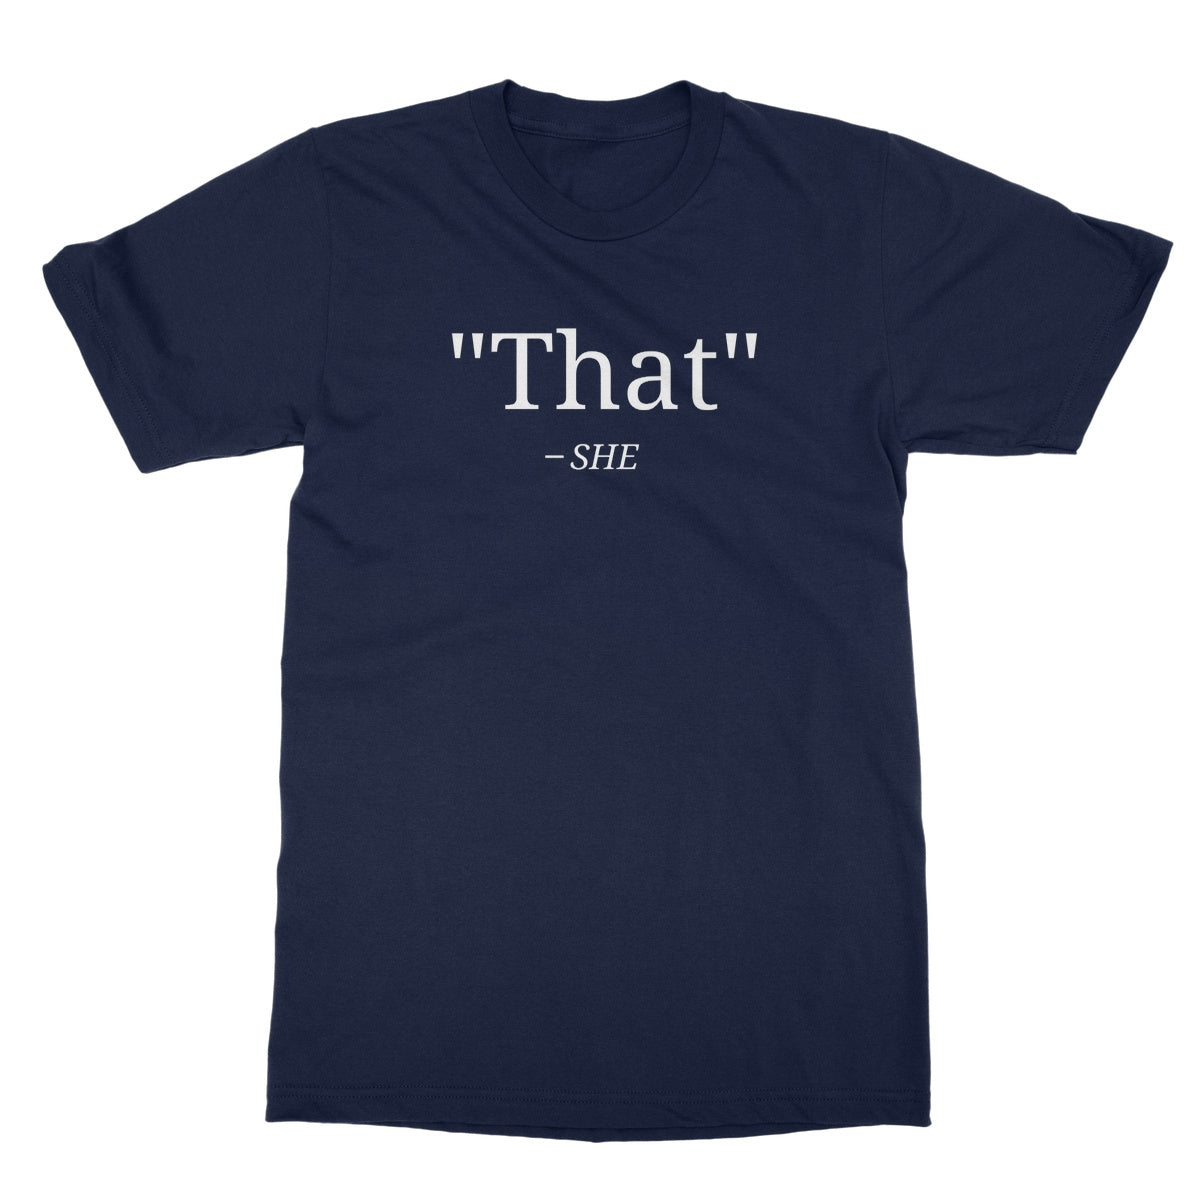 that's what she said t shirt navy